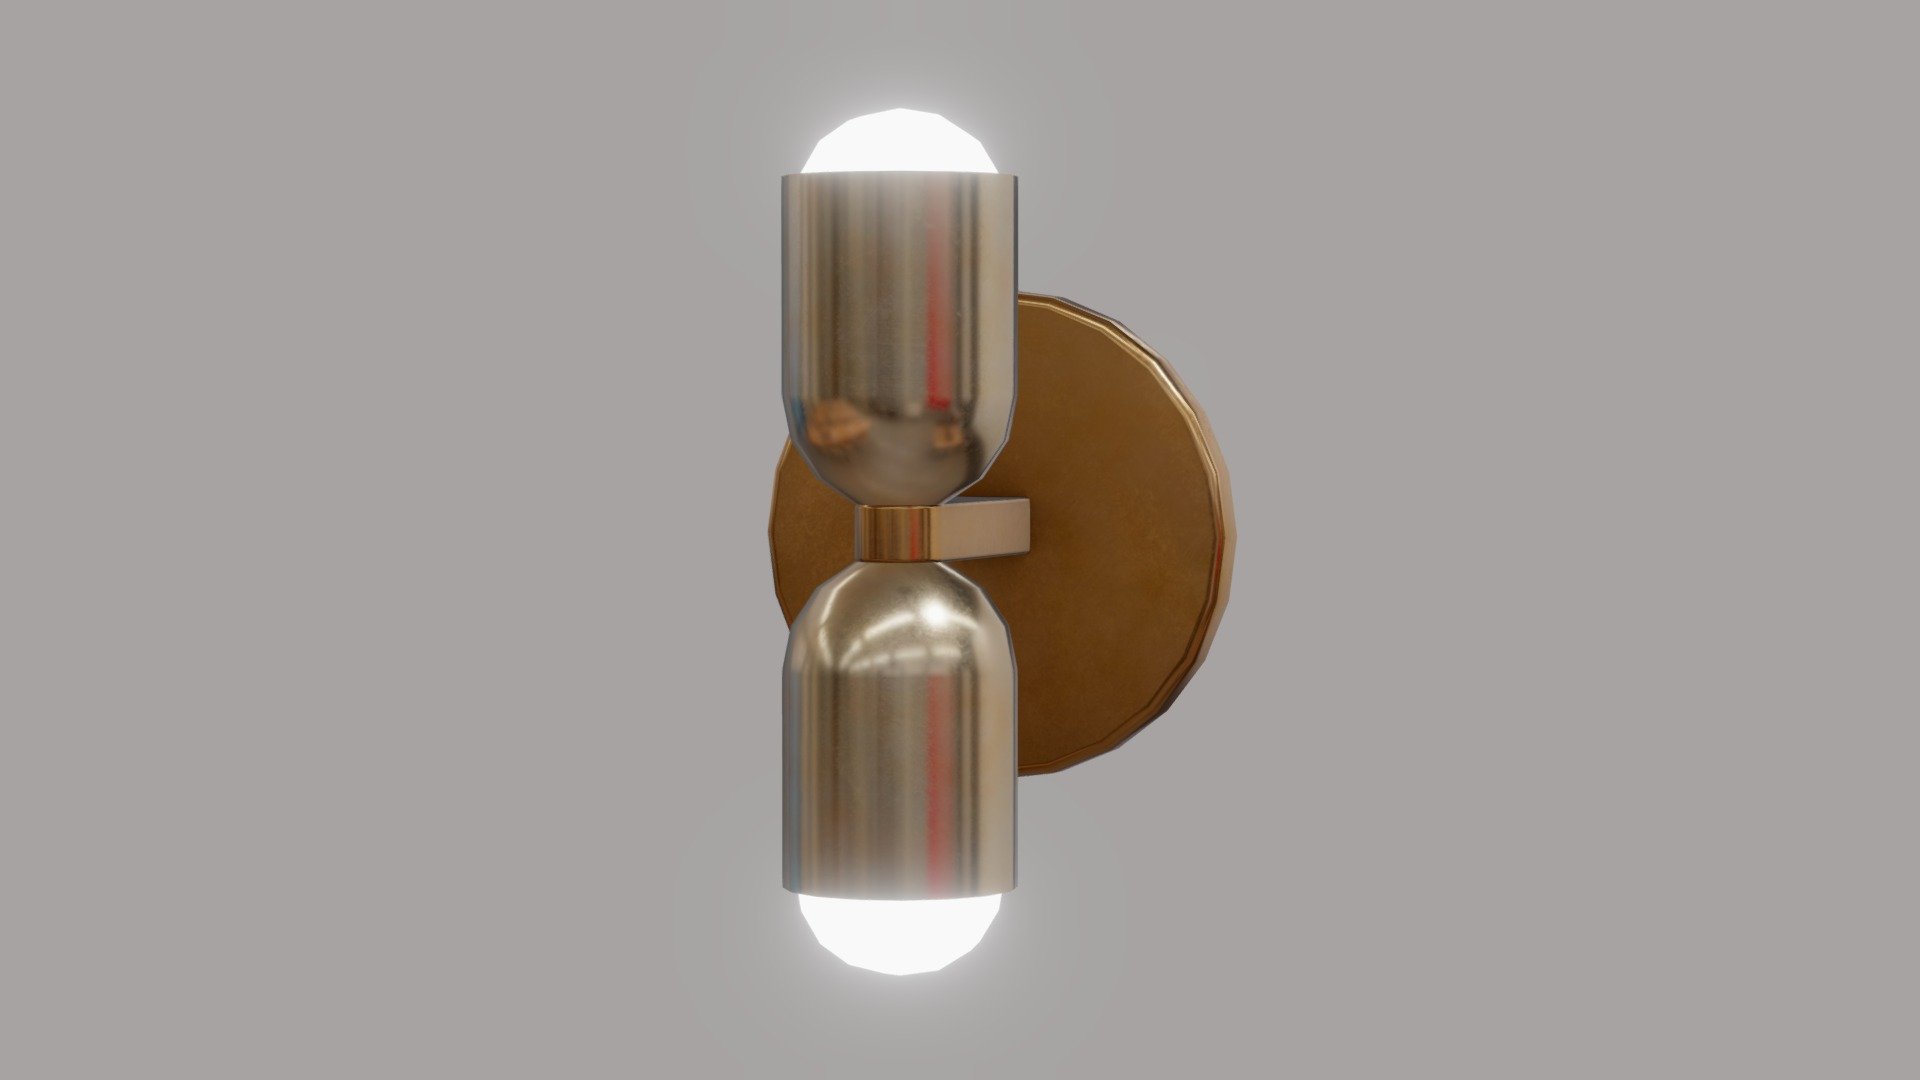 Sconce for your renders and games

Textures:

Diffuse color, Roughness, Mettalic, AO, Emissive

All textures are 2K

Files Formats:

Blend

Fbx

Obj - Sconce - Buy Royalty Free 3D model by Vanessa Araújo (@vanessa3d) 3d model